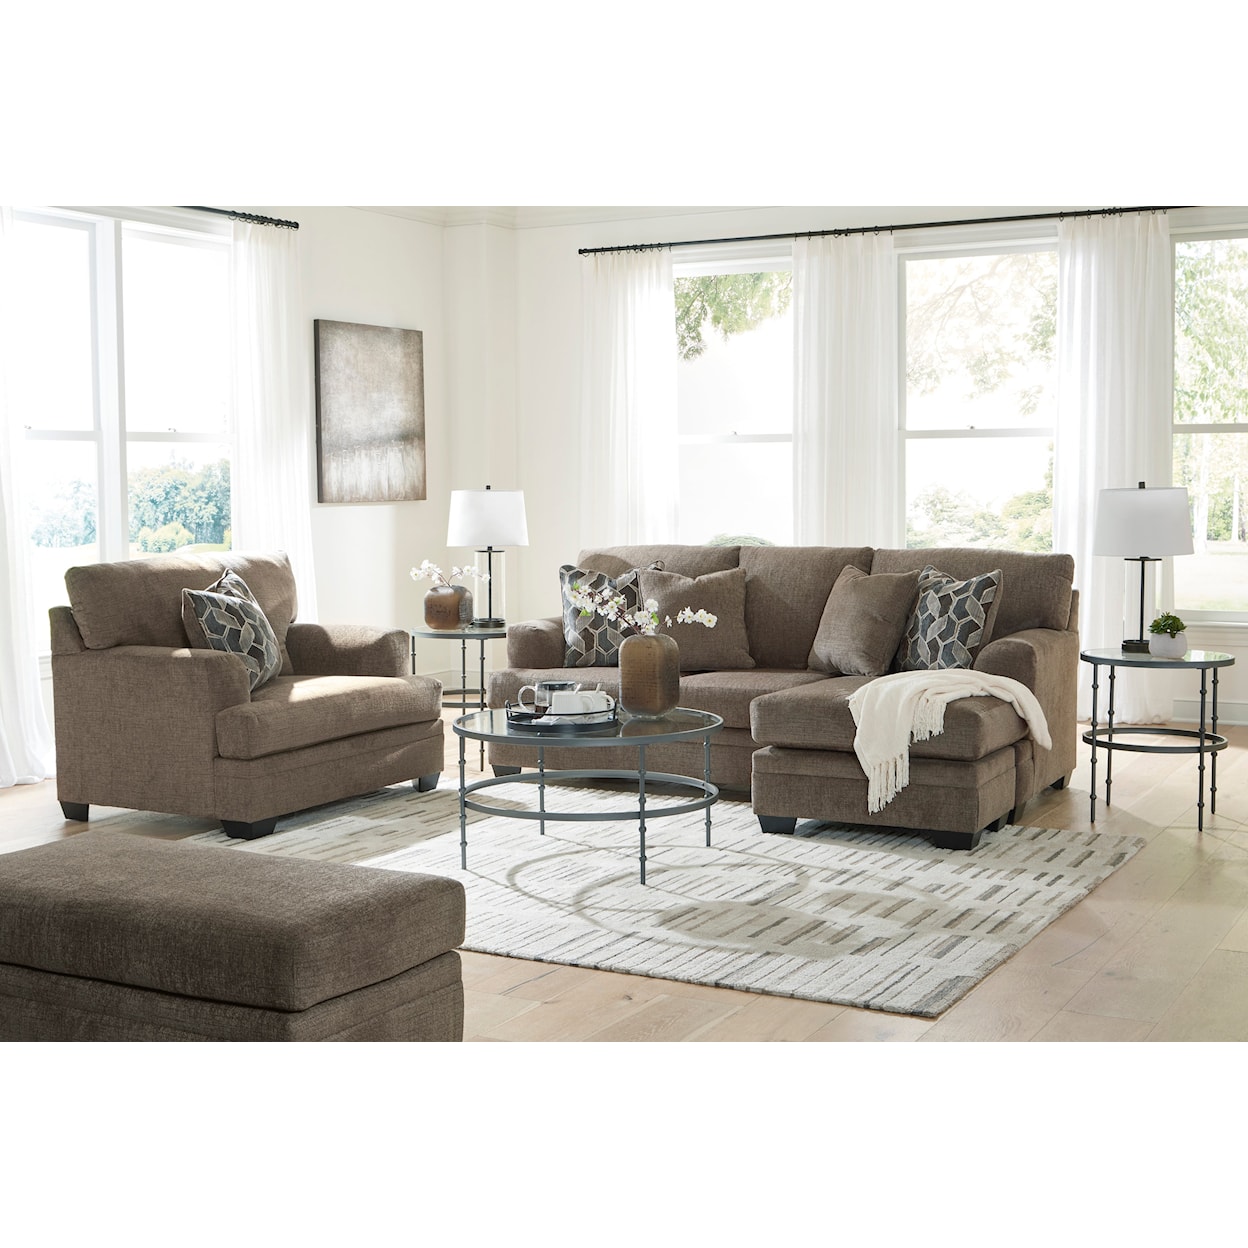 StyleLine Stonemeade Sofa Chaise, Oversized Chair and Ottoman